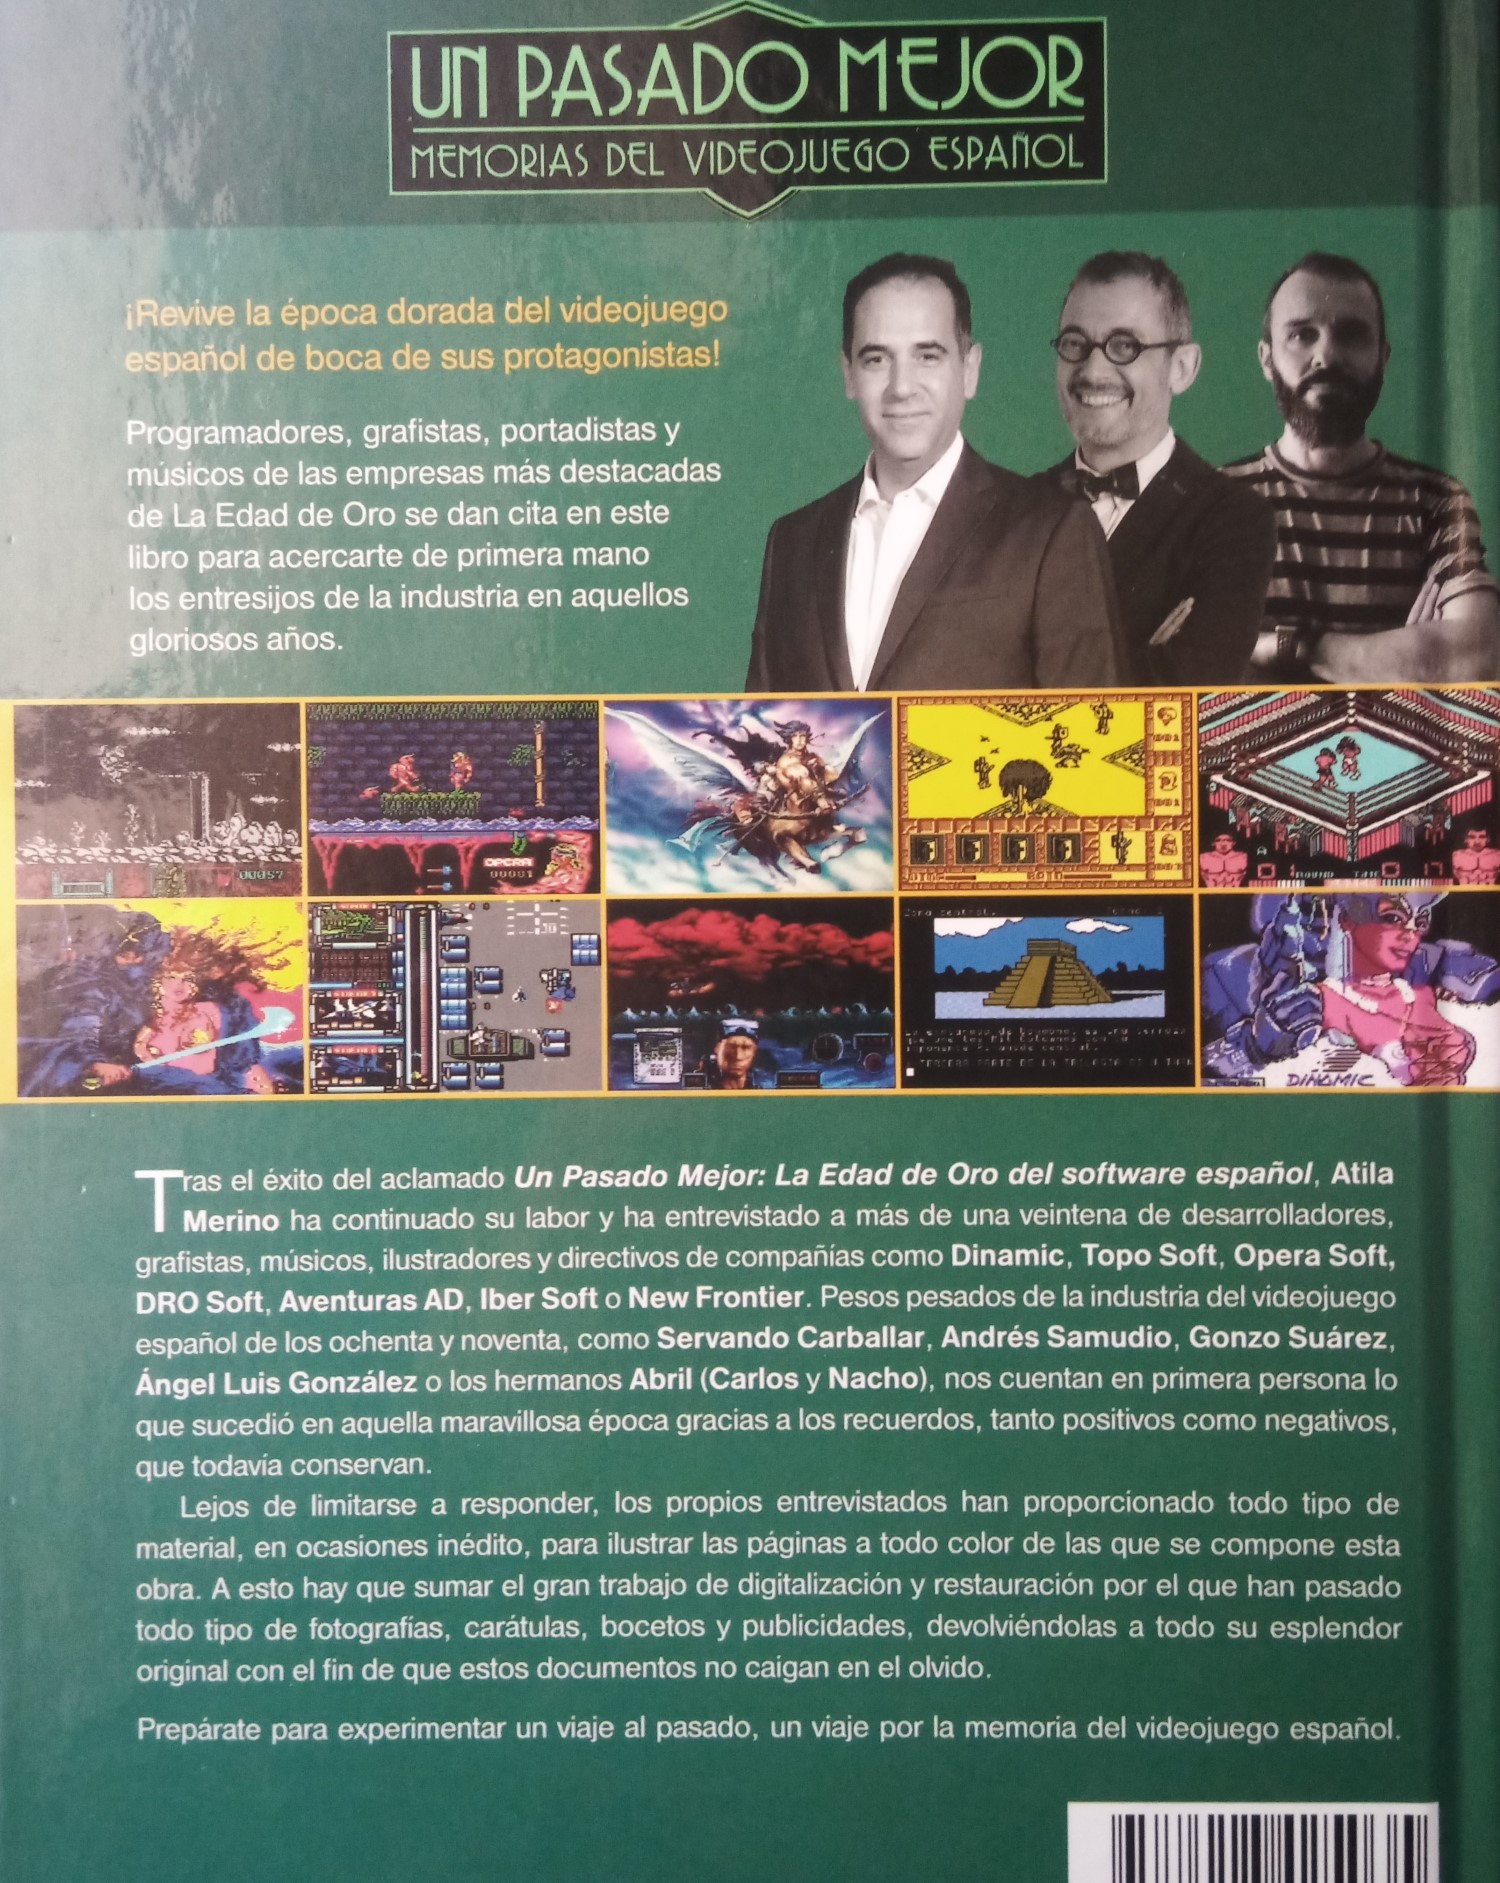 The back cover of Un Pasado Mejor, including a detailed description of its contents (in Spanish). The book is a second volume in the Un Pasado Mejor series, this time focusing on the companies Dinamic, Topo Soft, Opera Soft, DRO Soft, Aventuras AD, Iber Soft, and New Frontier.